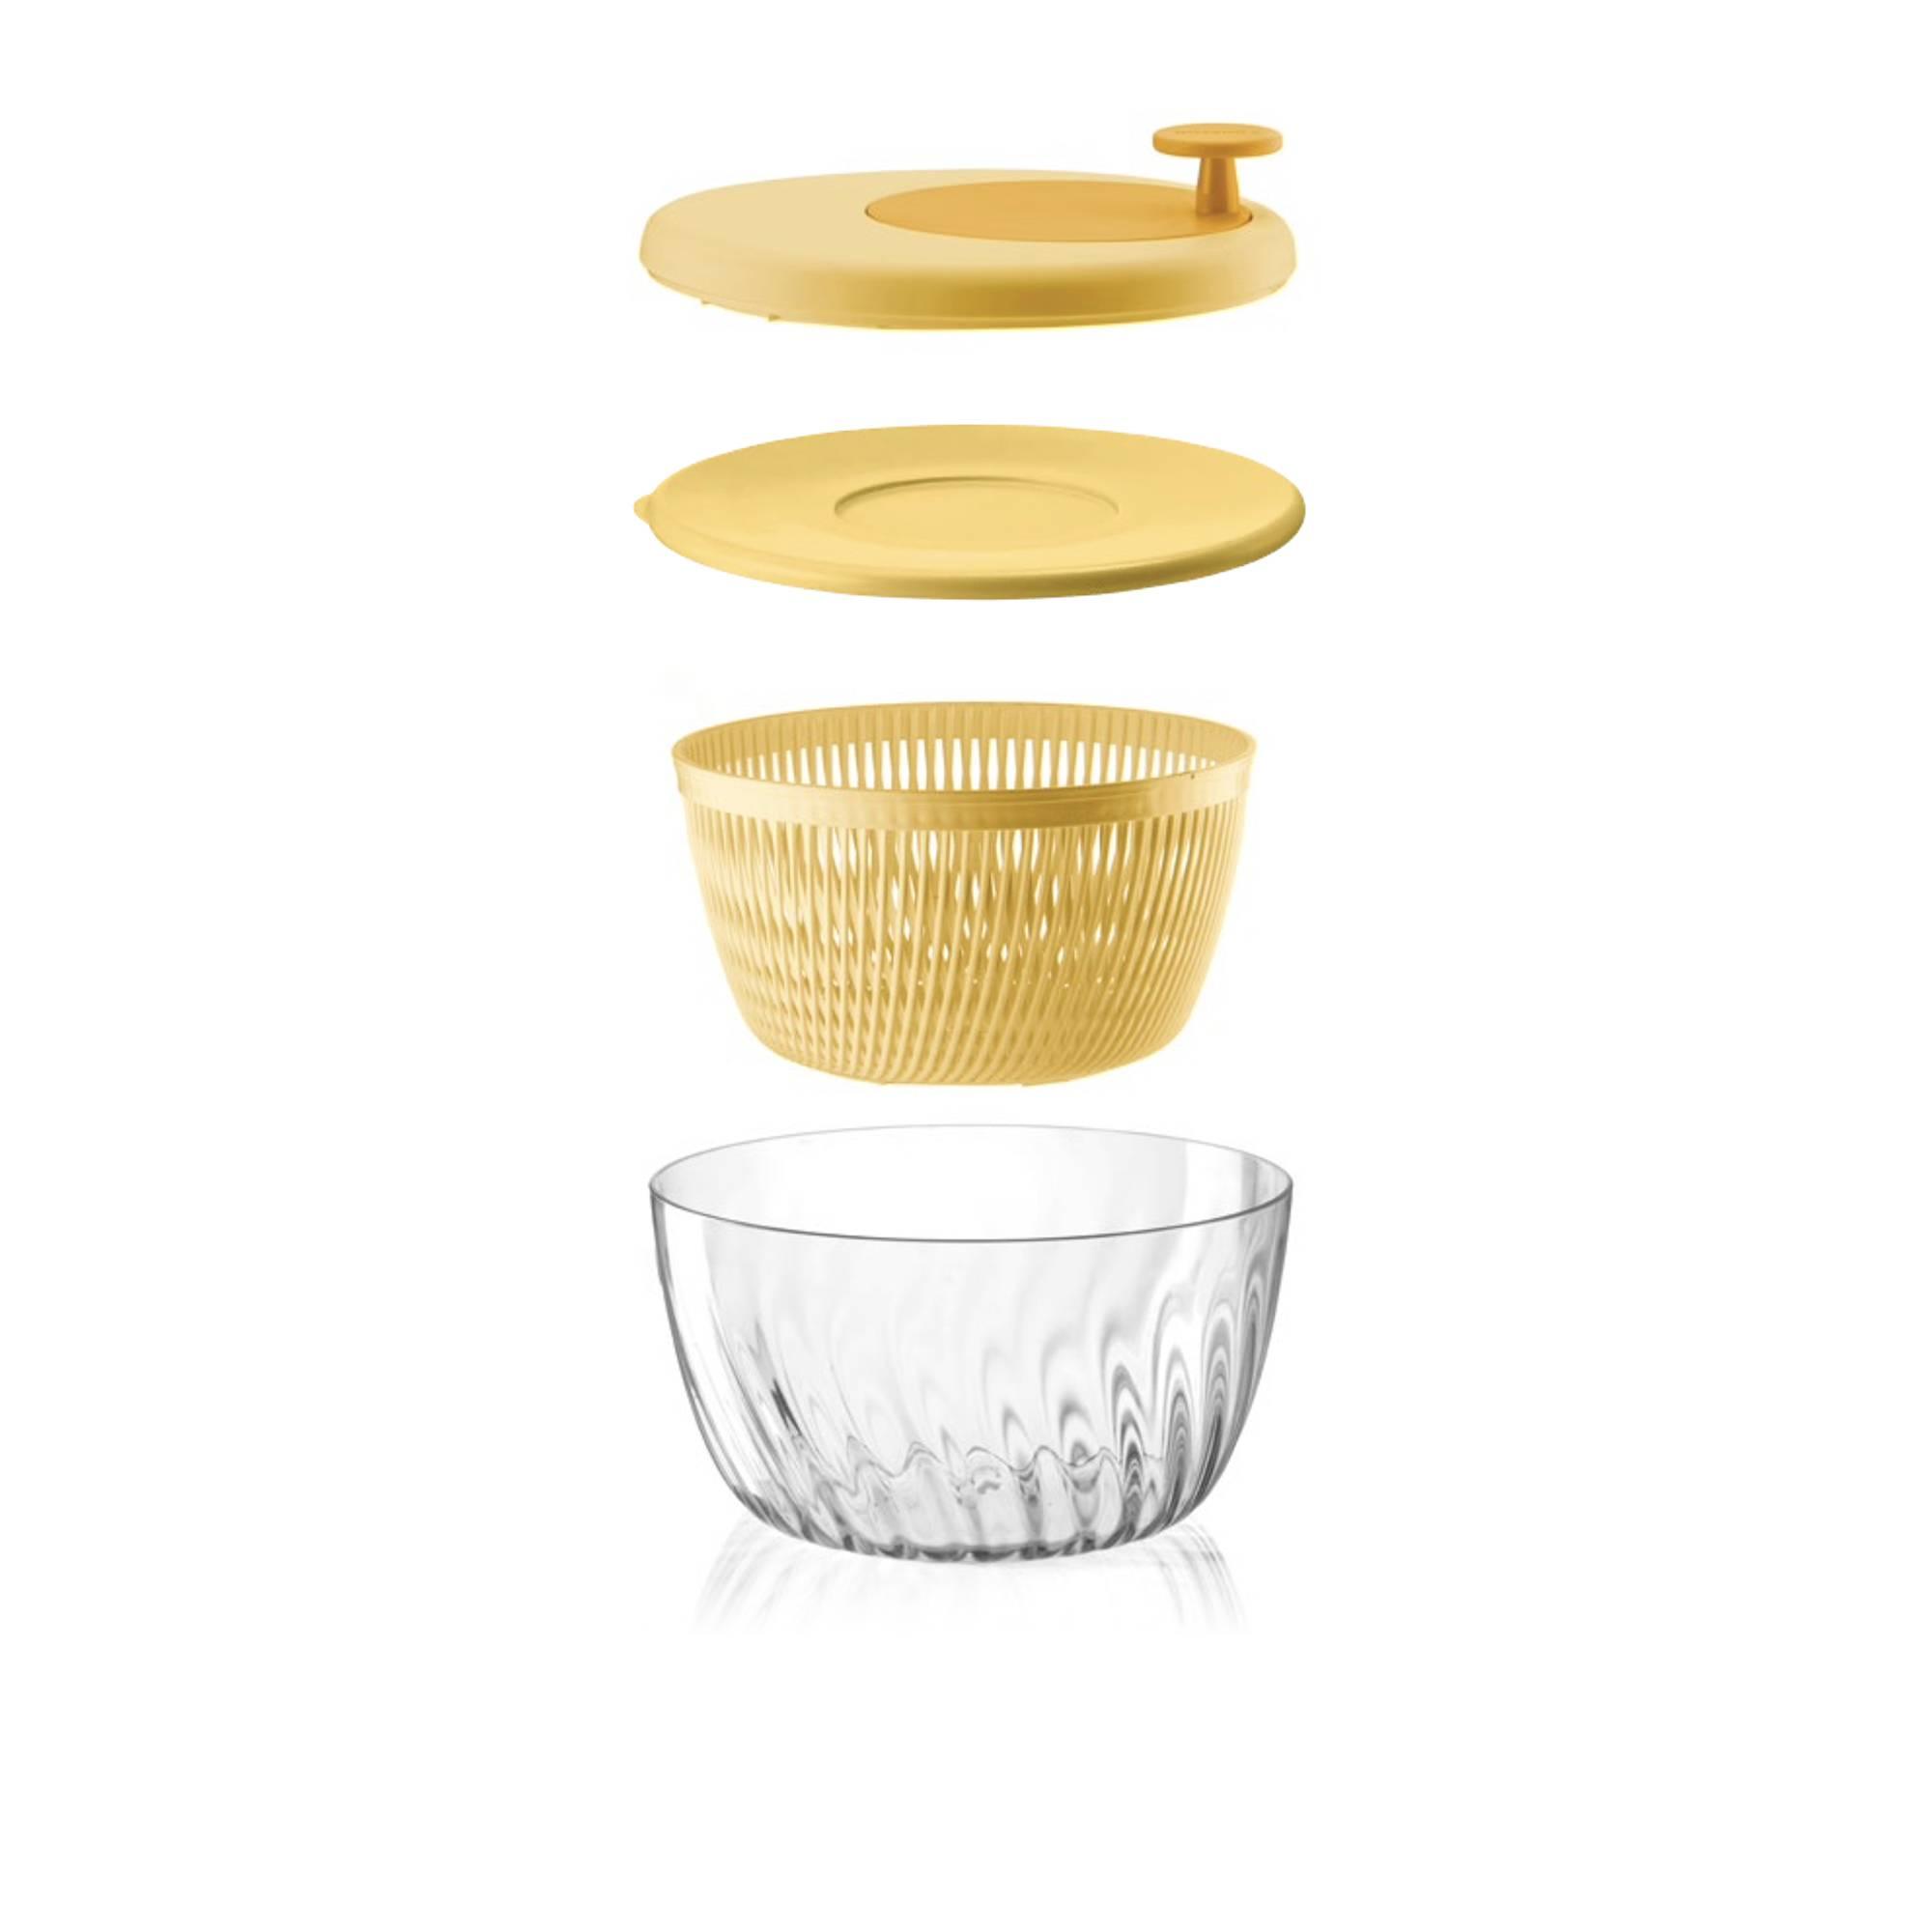 Guzzini Spin & Store Salad Spinner Yellow Image 6